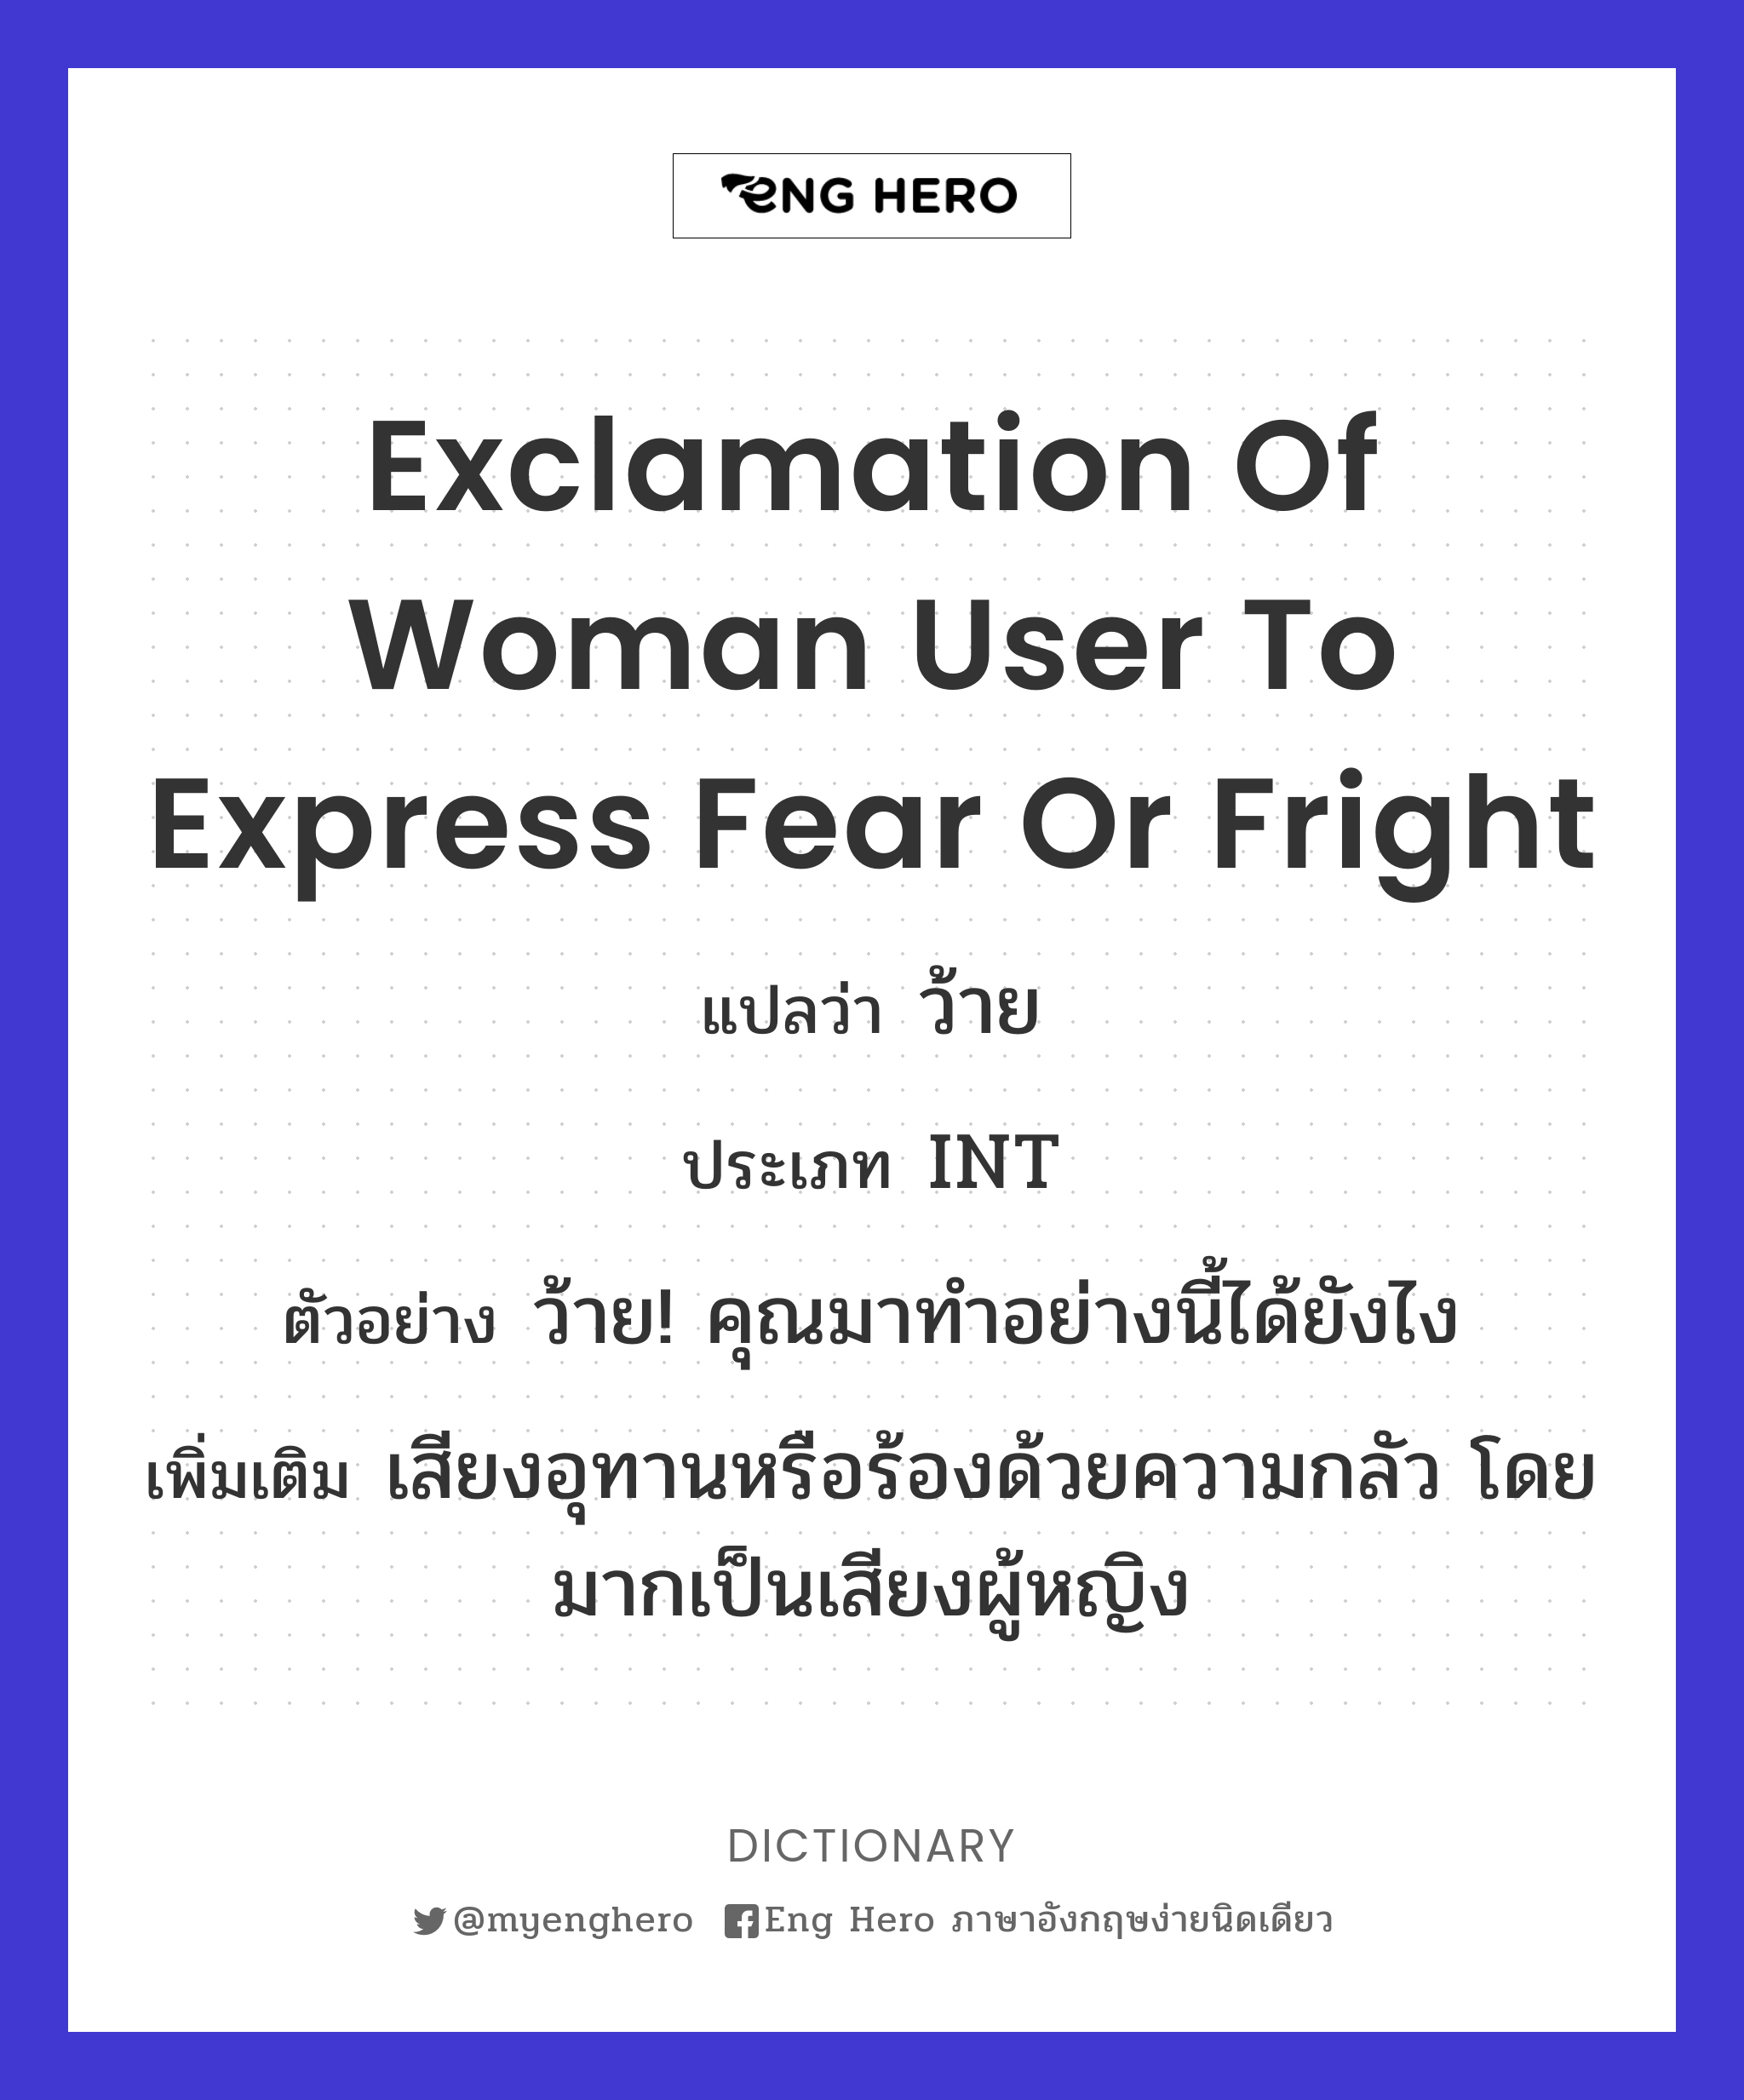 exclamation of woman user to express fear or fright